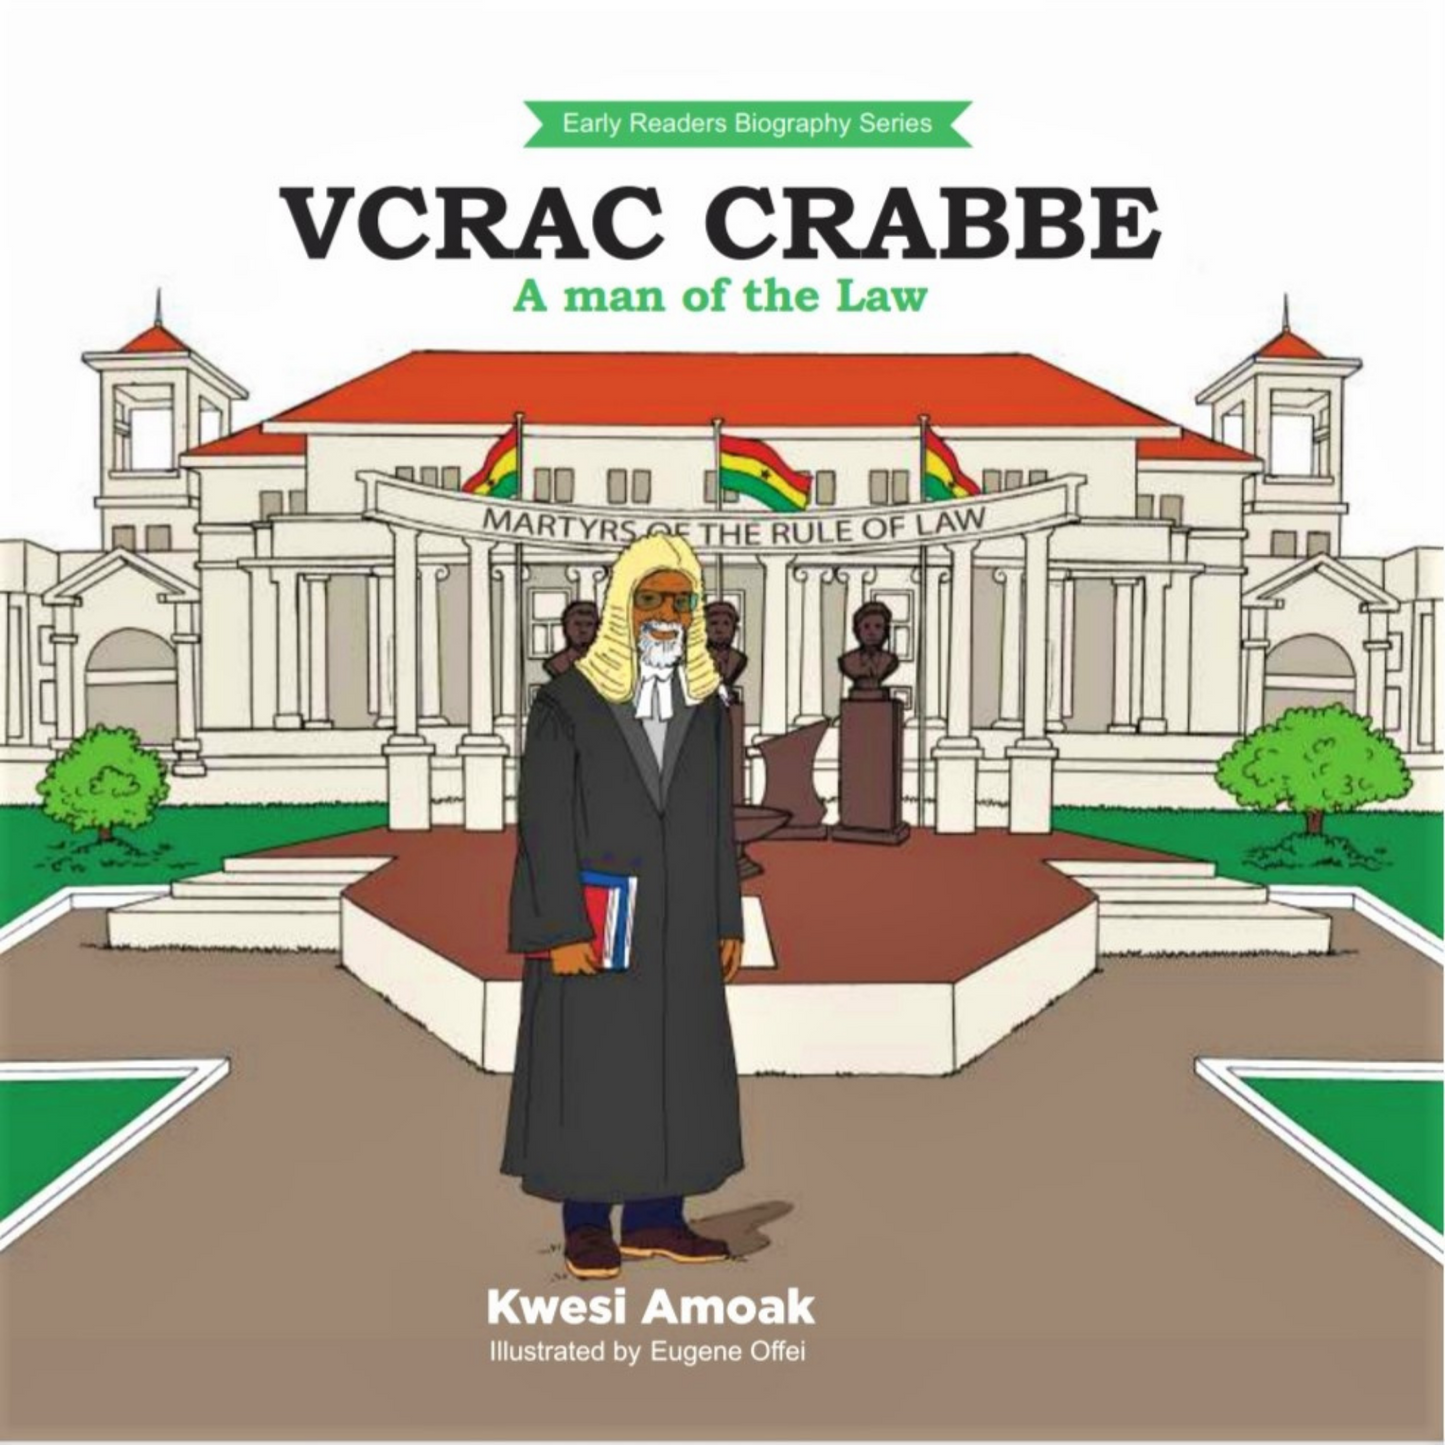 VCRAC Crabbe: A Man of the Law